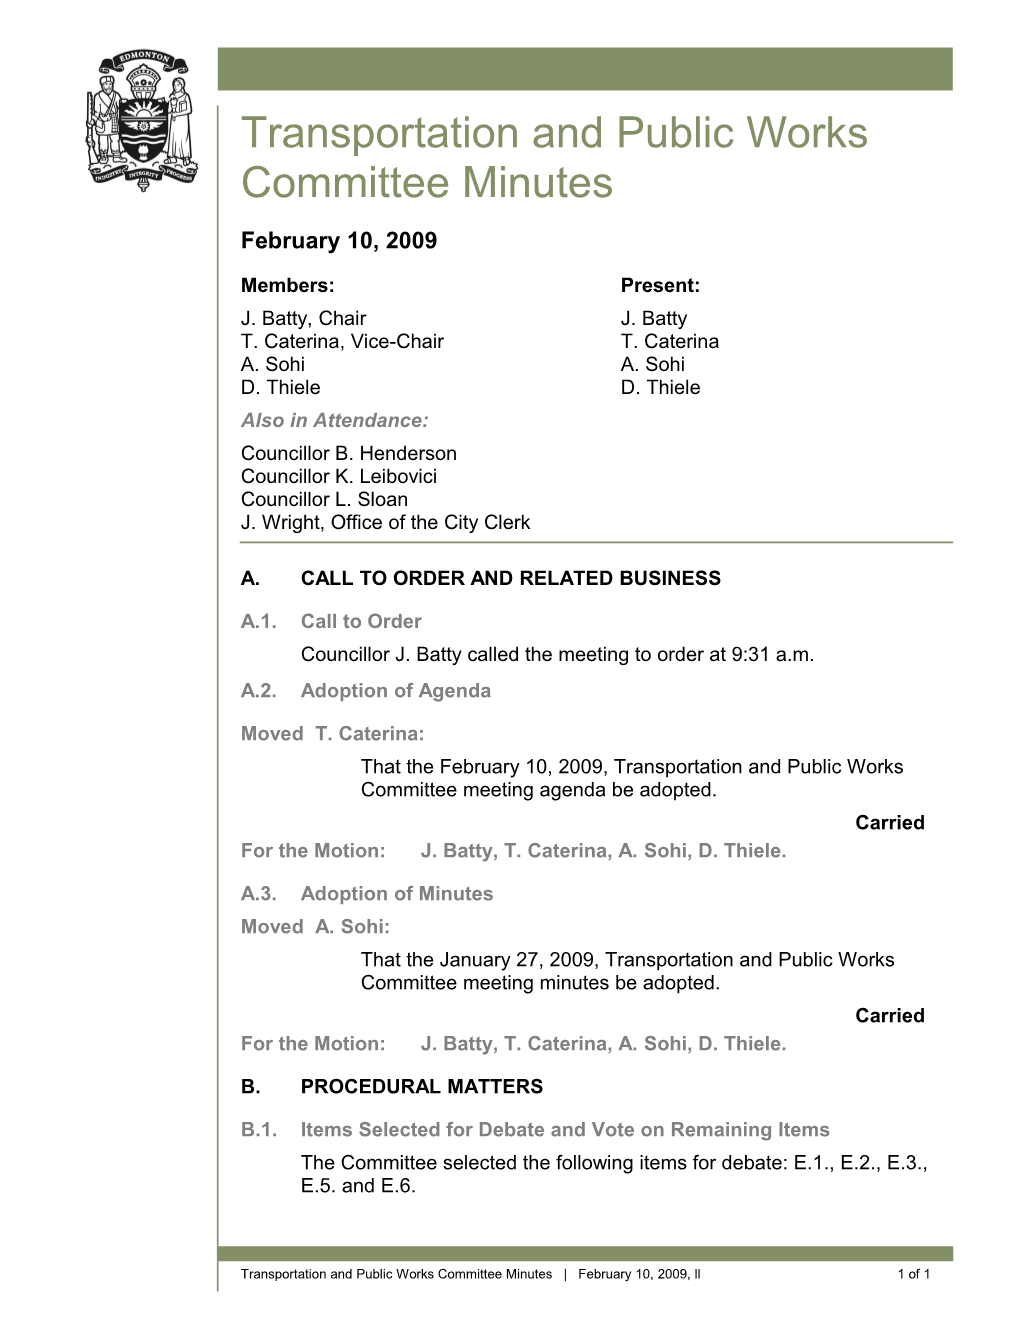 Minutes for Transportation and Public Works Committee February 10, 2009 Meeting